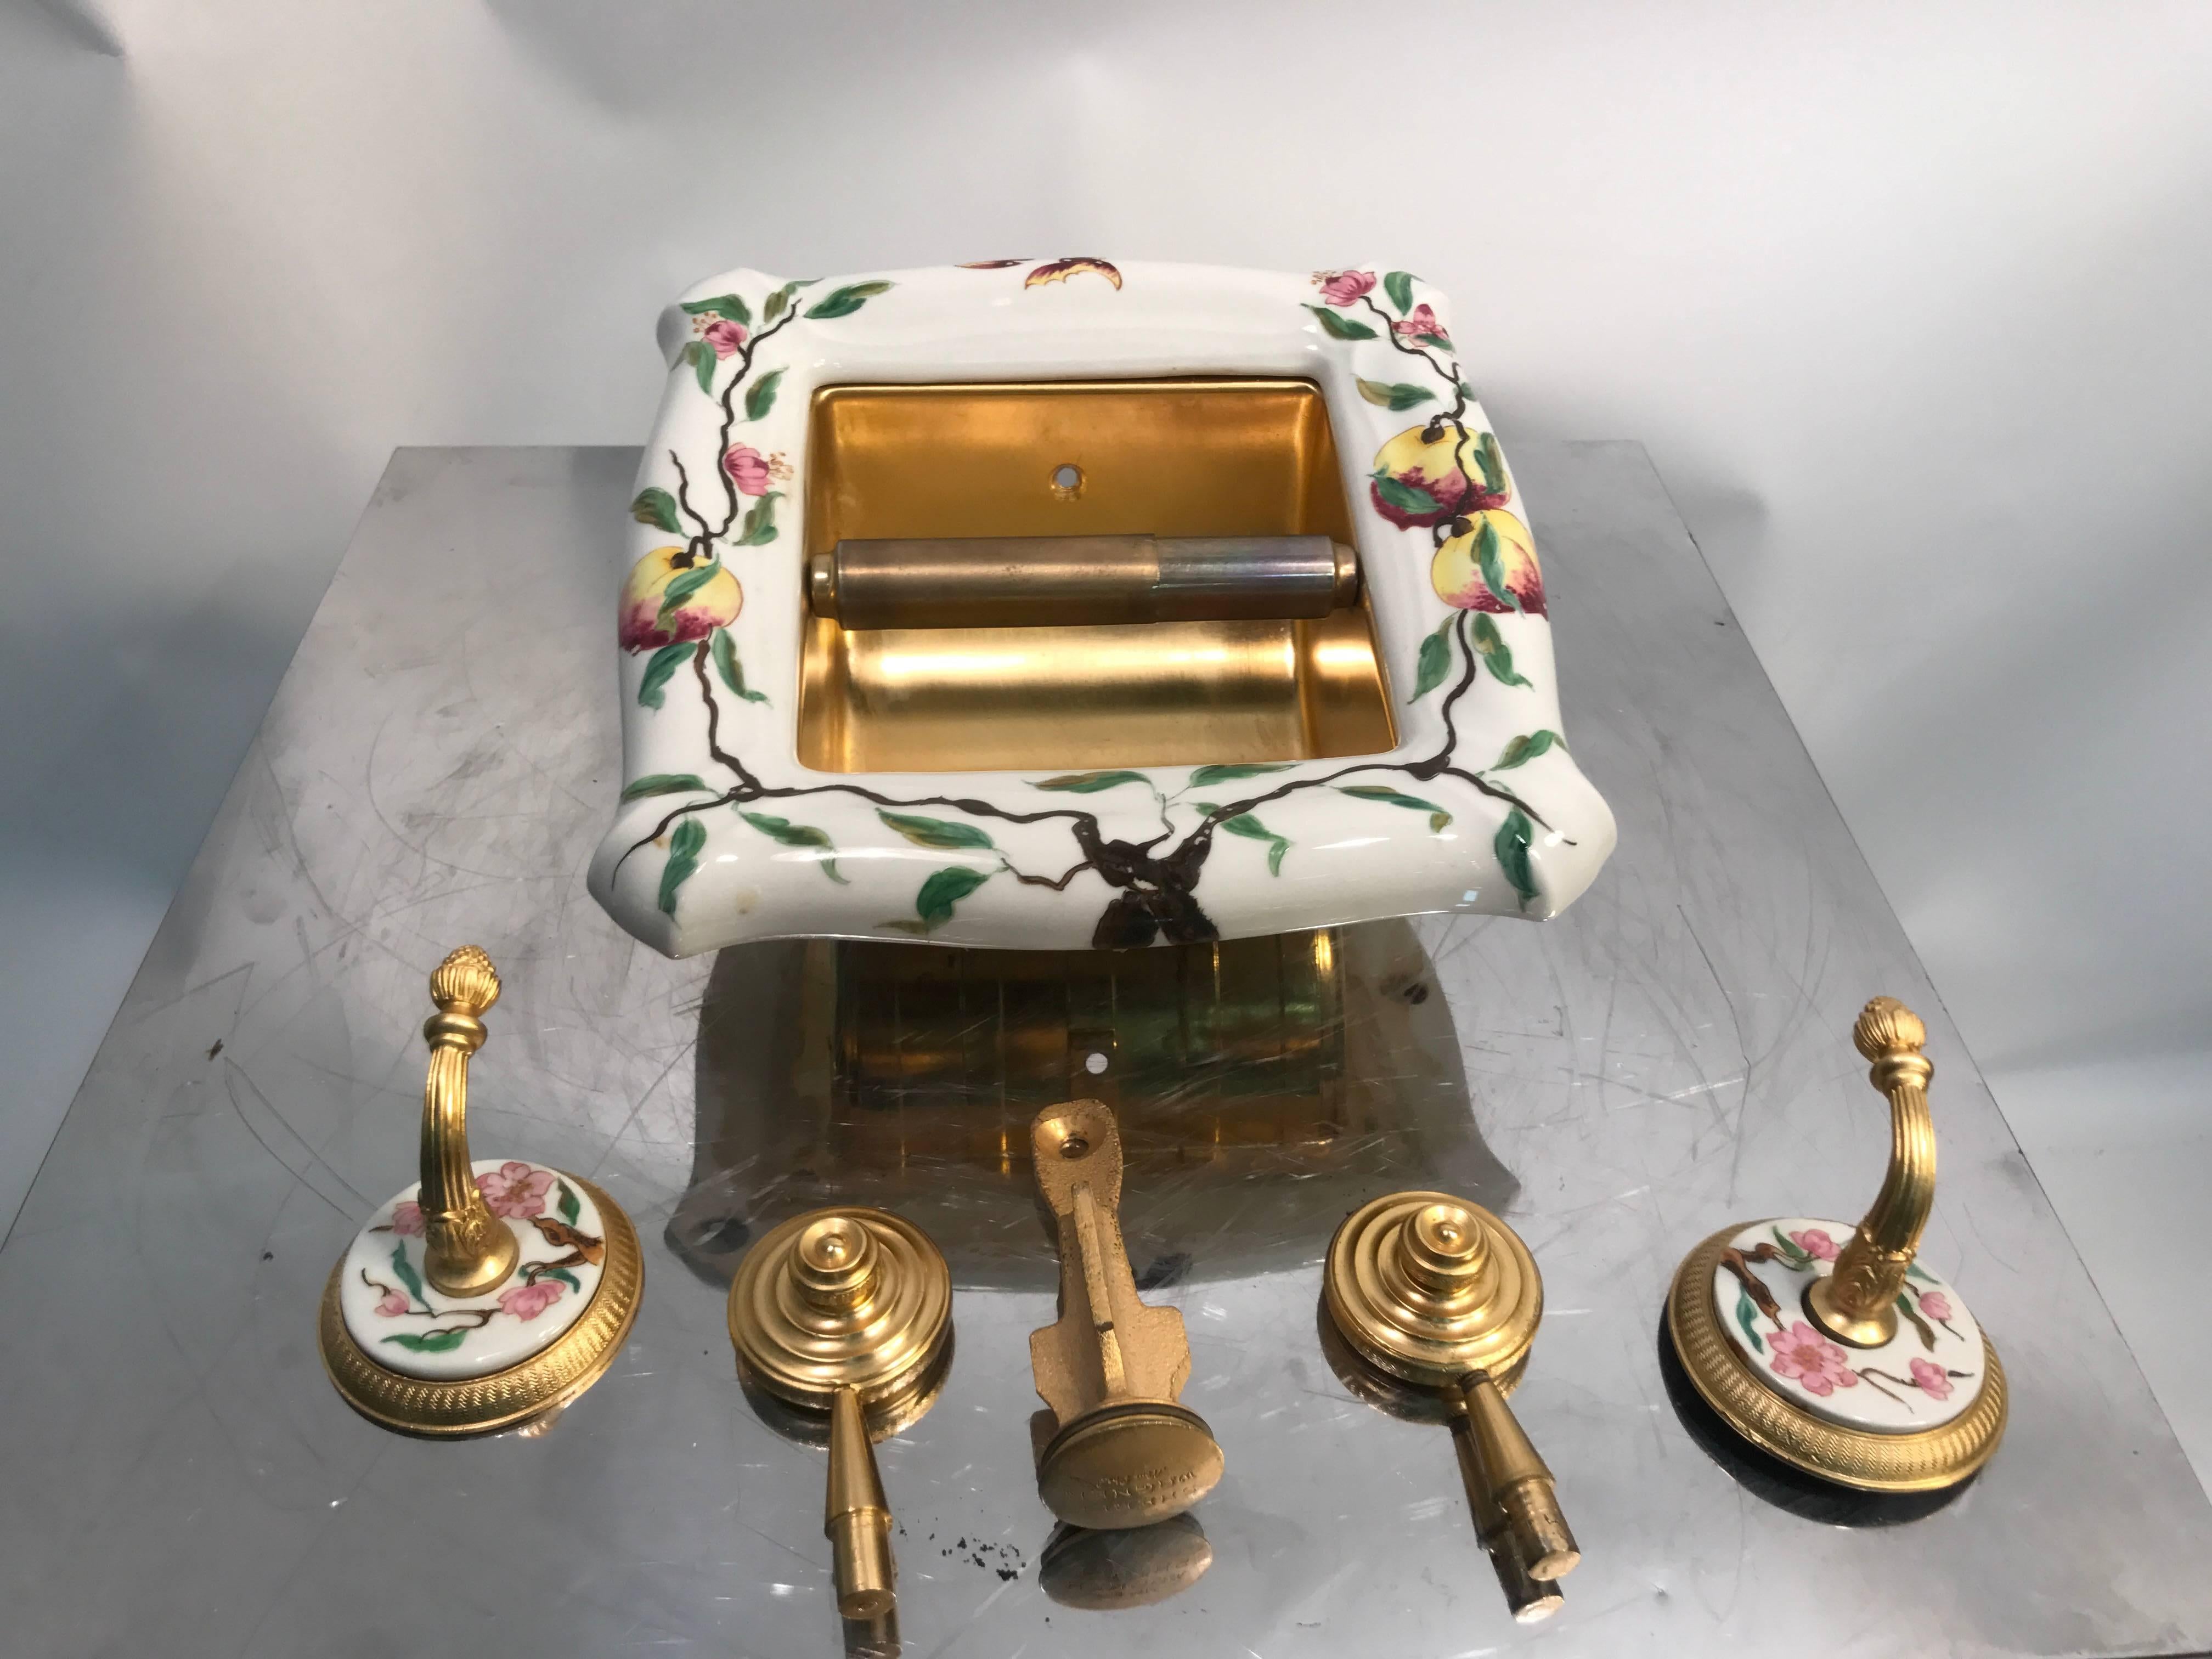 Exceptional Hand-Painted Porcelain & Gilt Bronze Sink with Bathroom Accessories 3